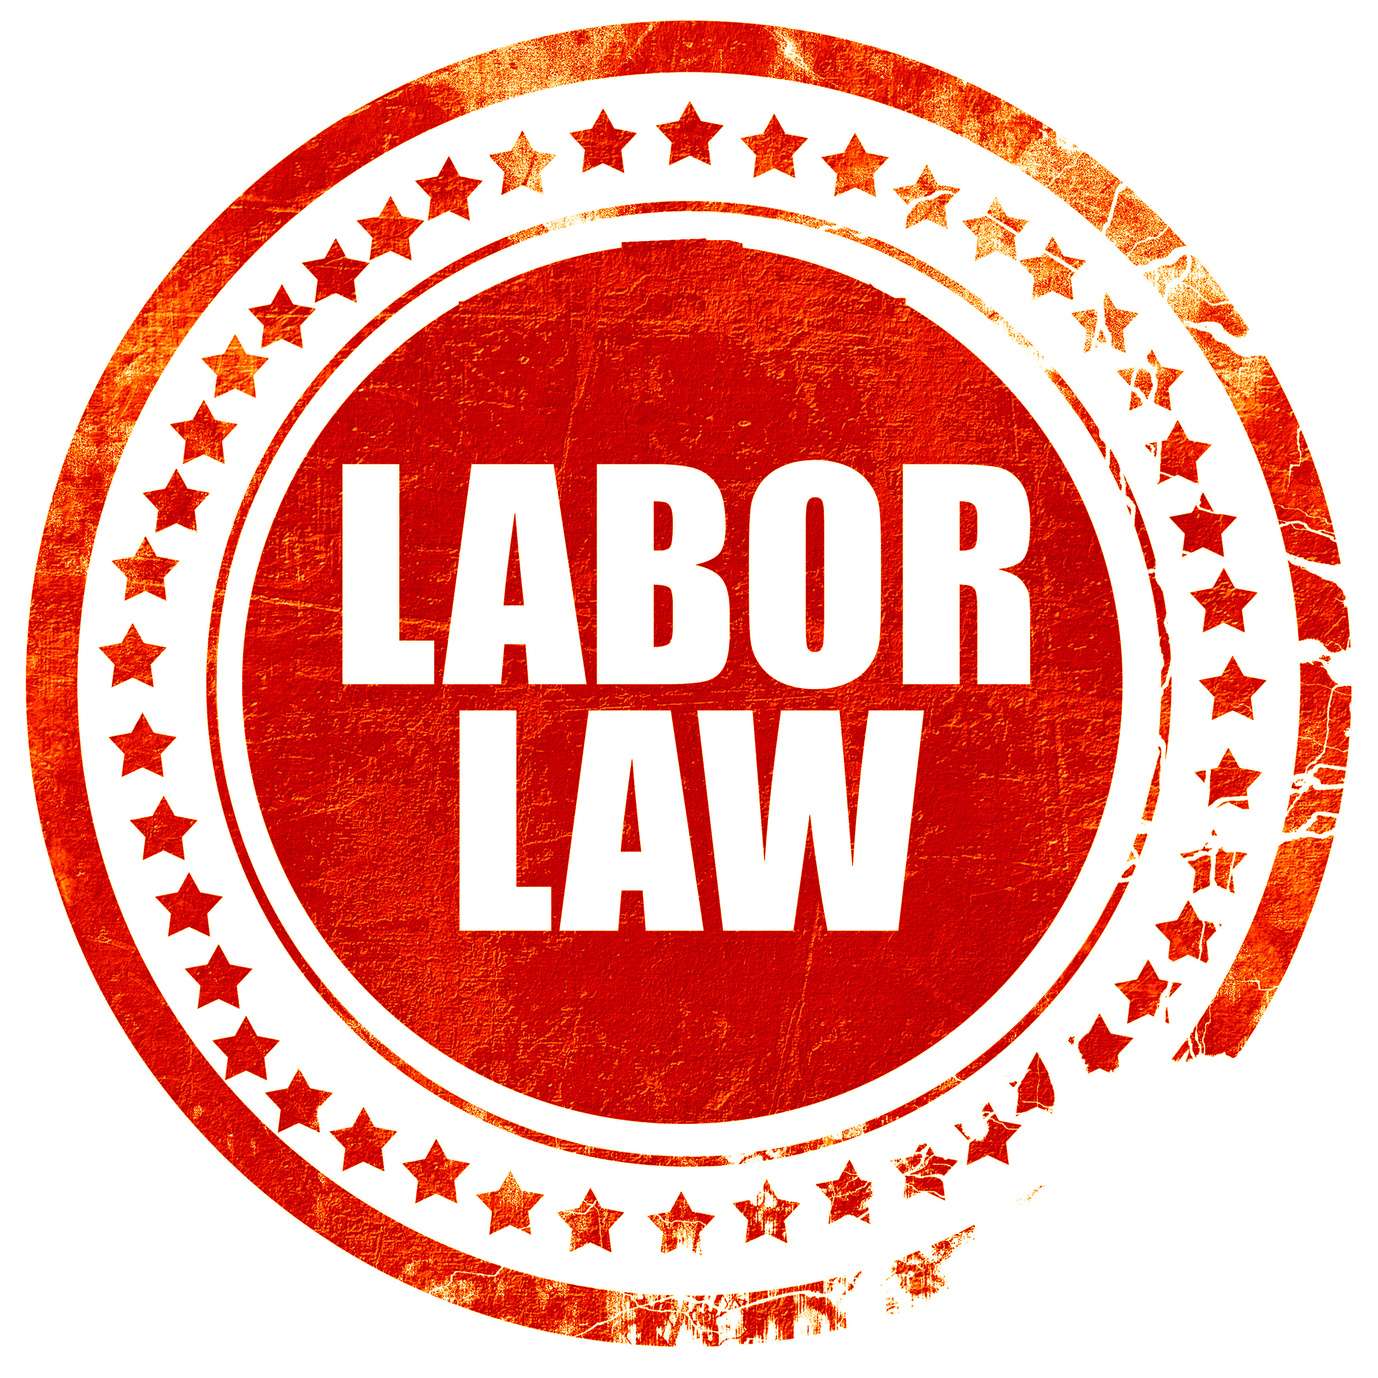 labor law, isolated red stamp on a solid white background